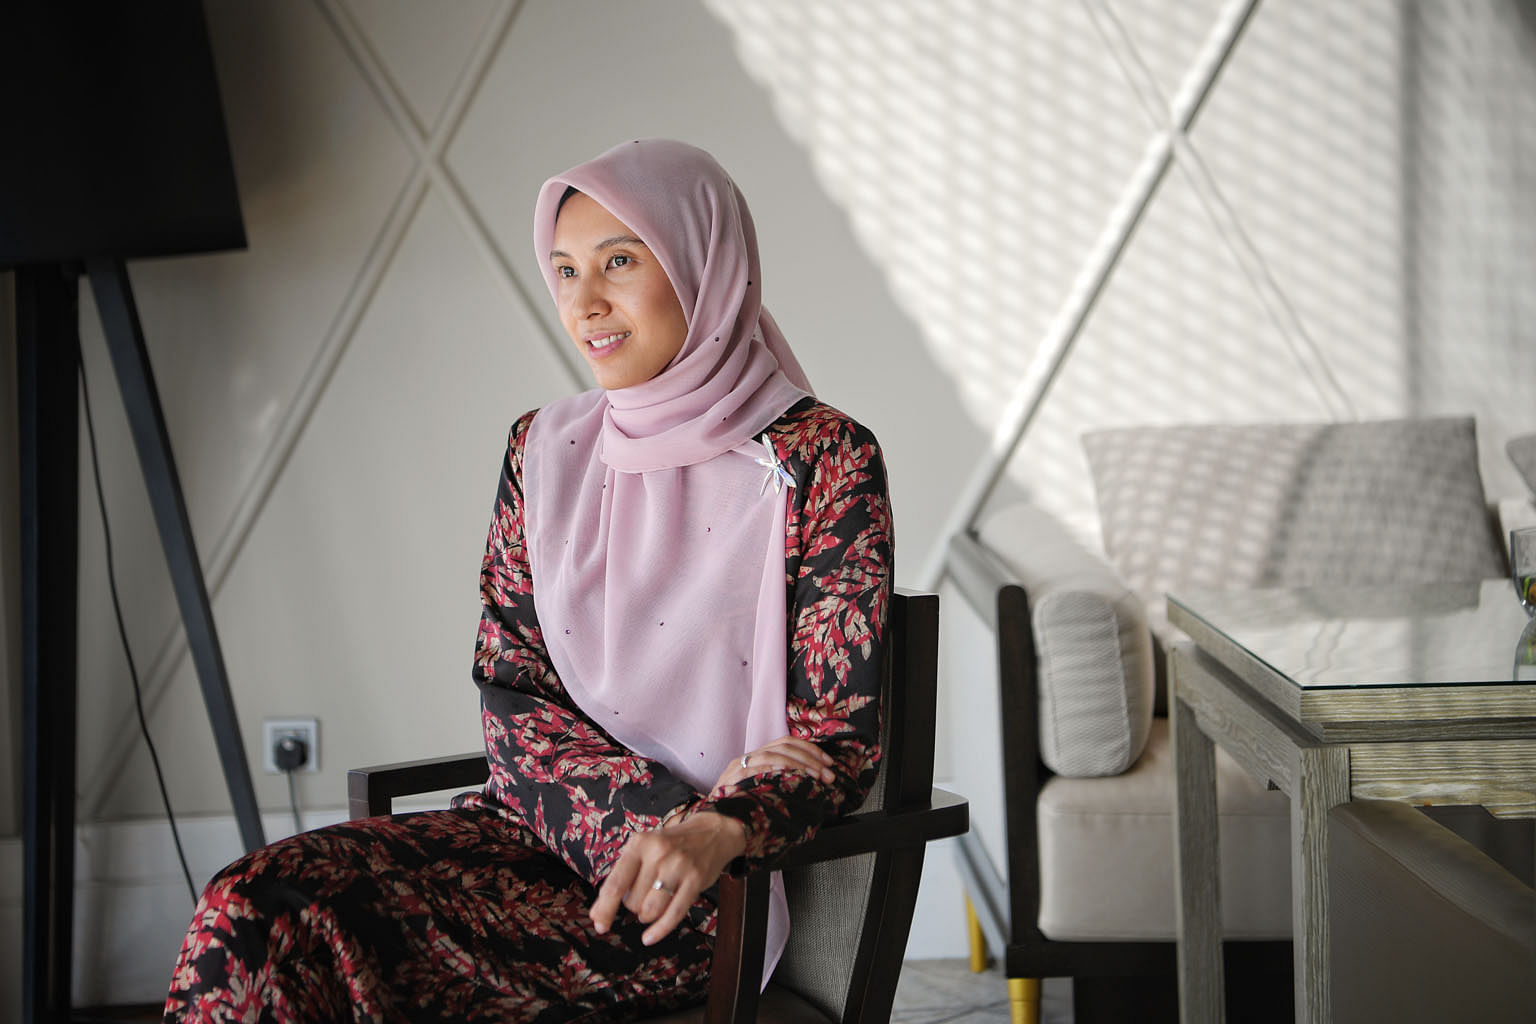 Ms Nurul Izzah Anwar has been under the media spotlight since she was 18, when her father Anwar Ibrahim was arrested and later jailed. She has seen more than most when it comes to politics.